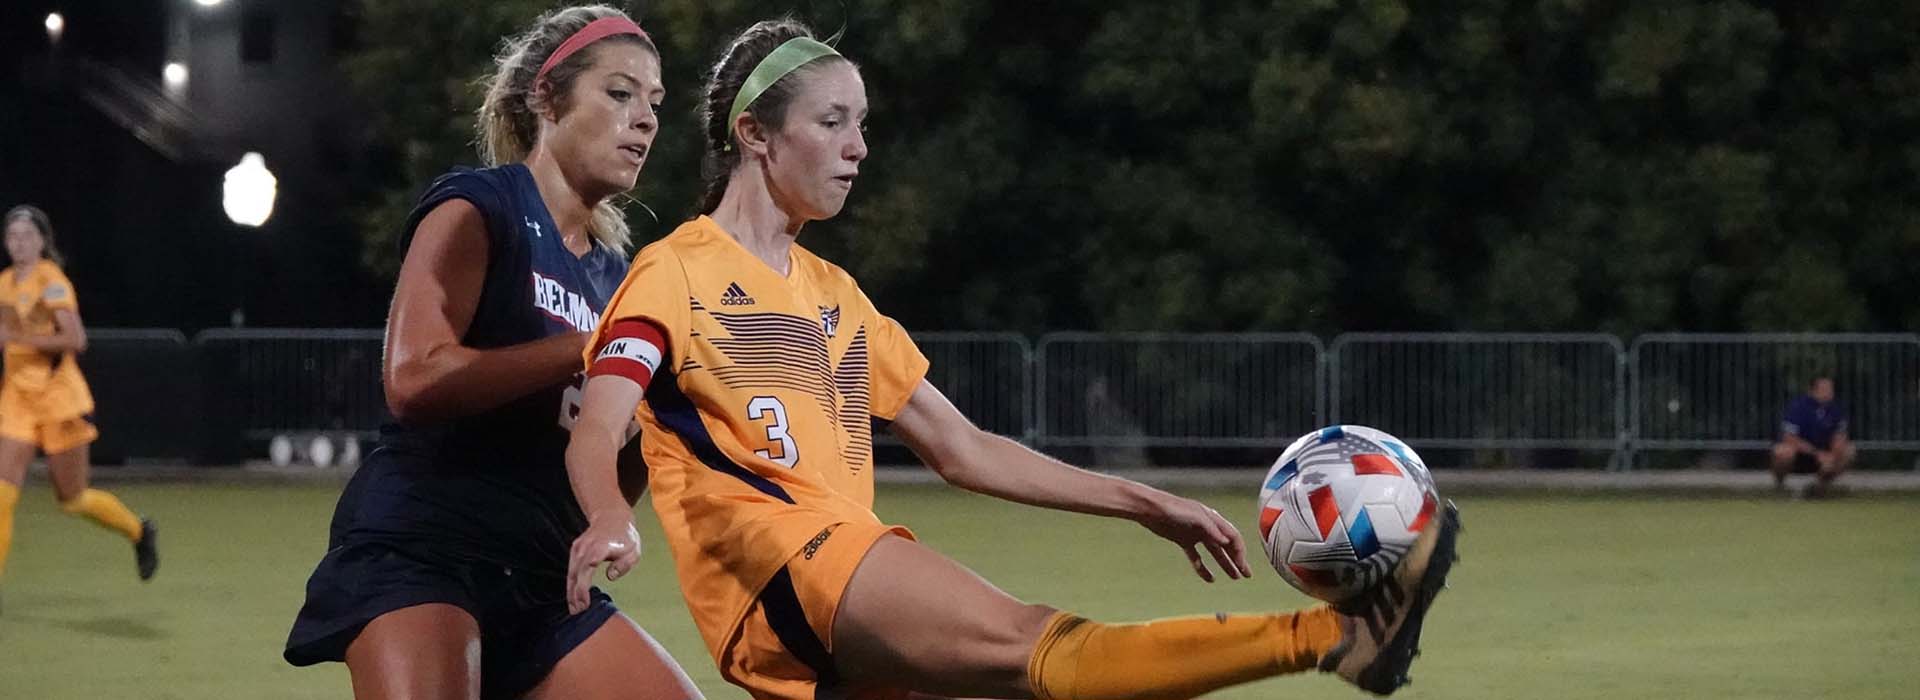 Tech travels to Austin Peay for club’s fourth match in eight days